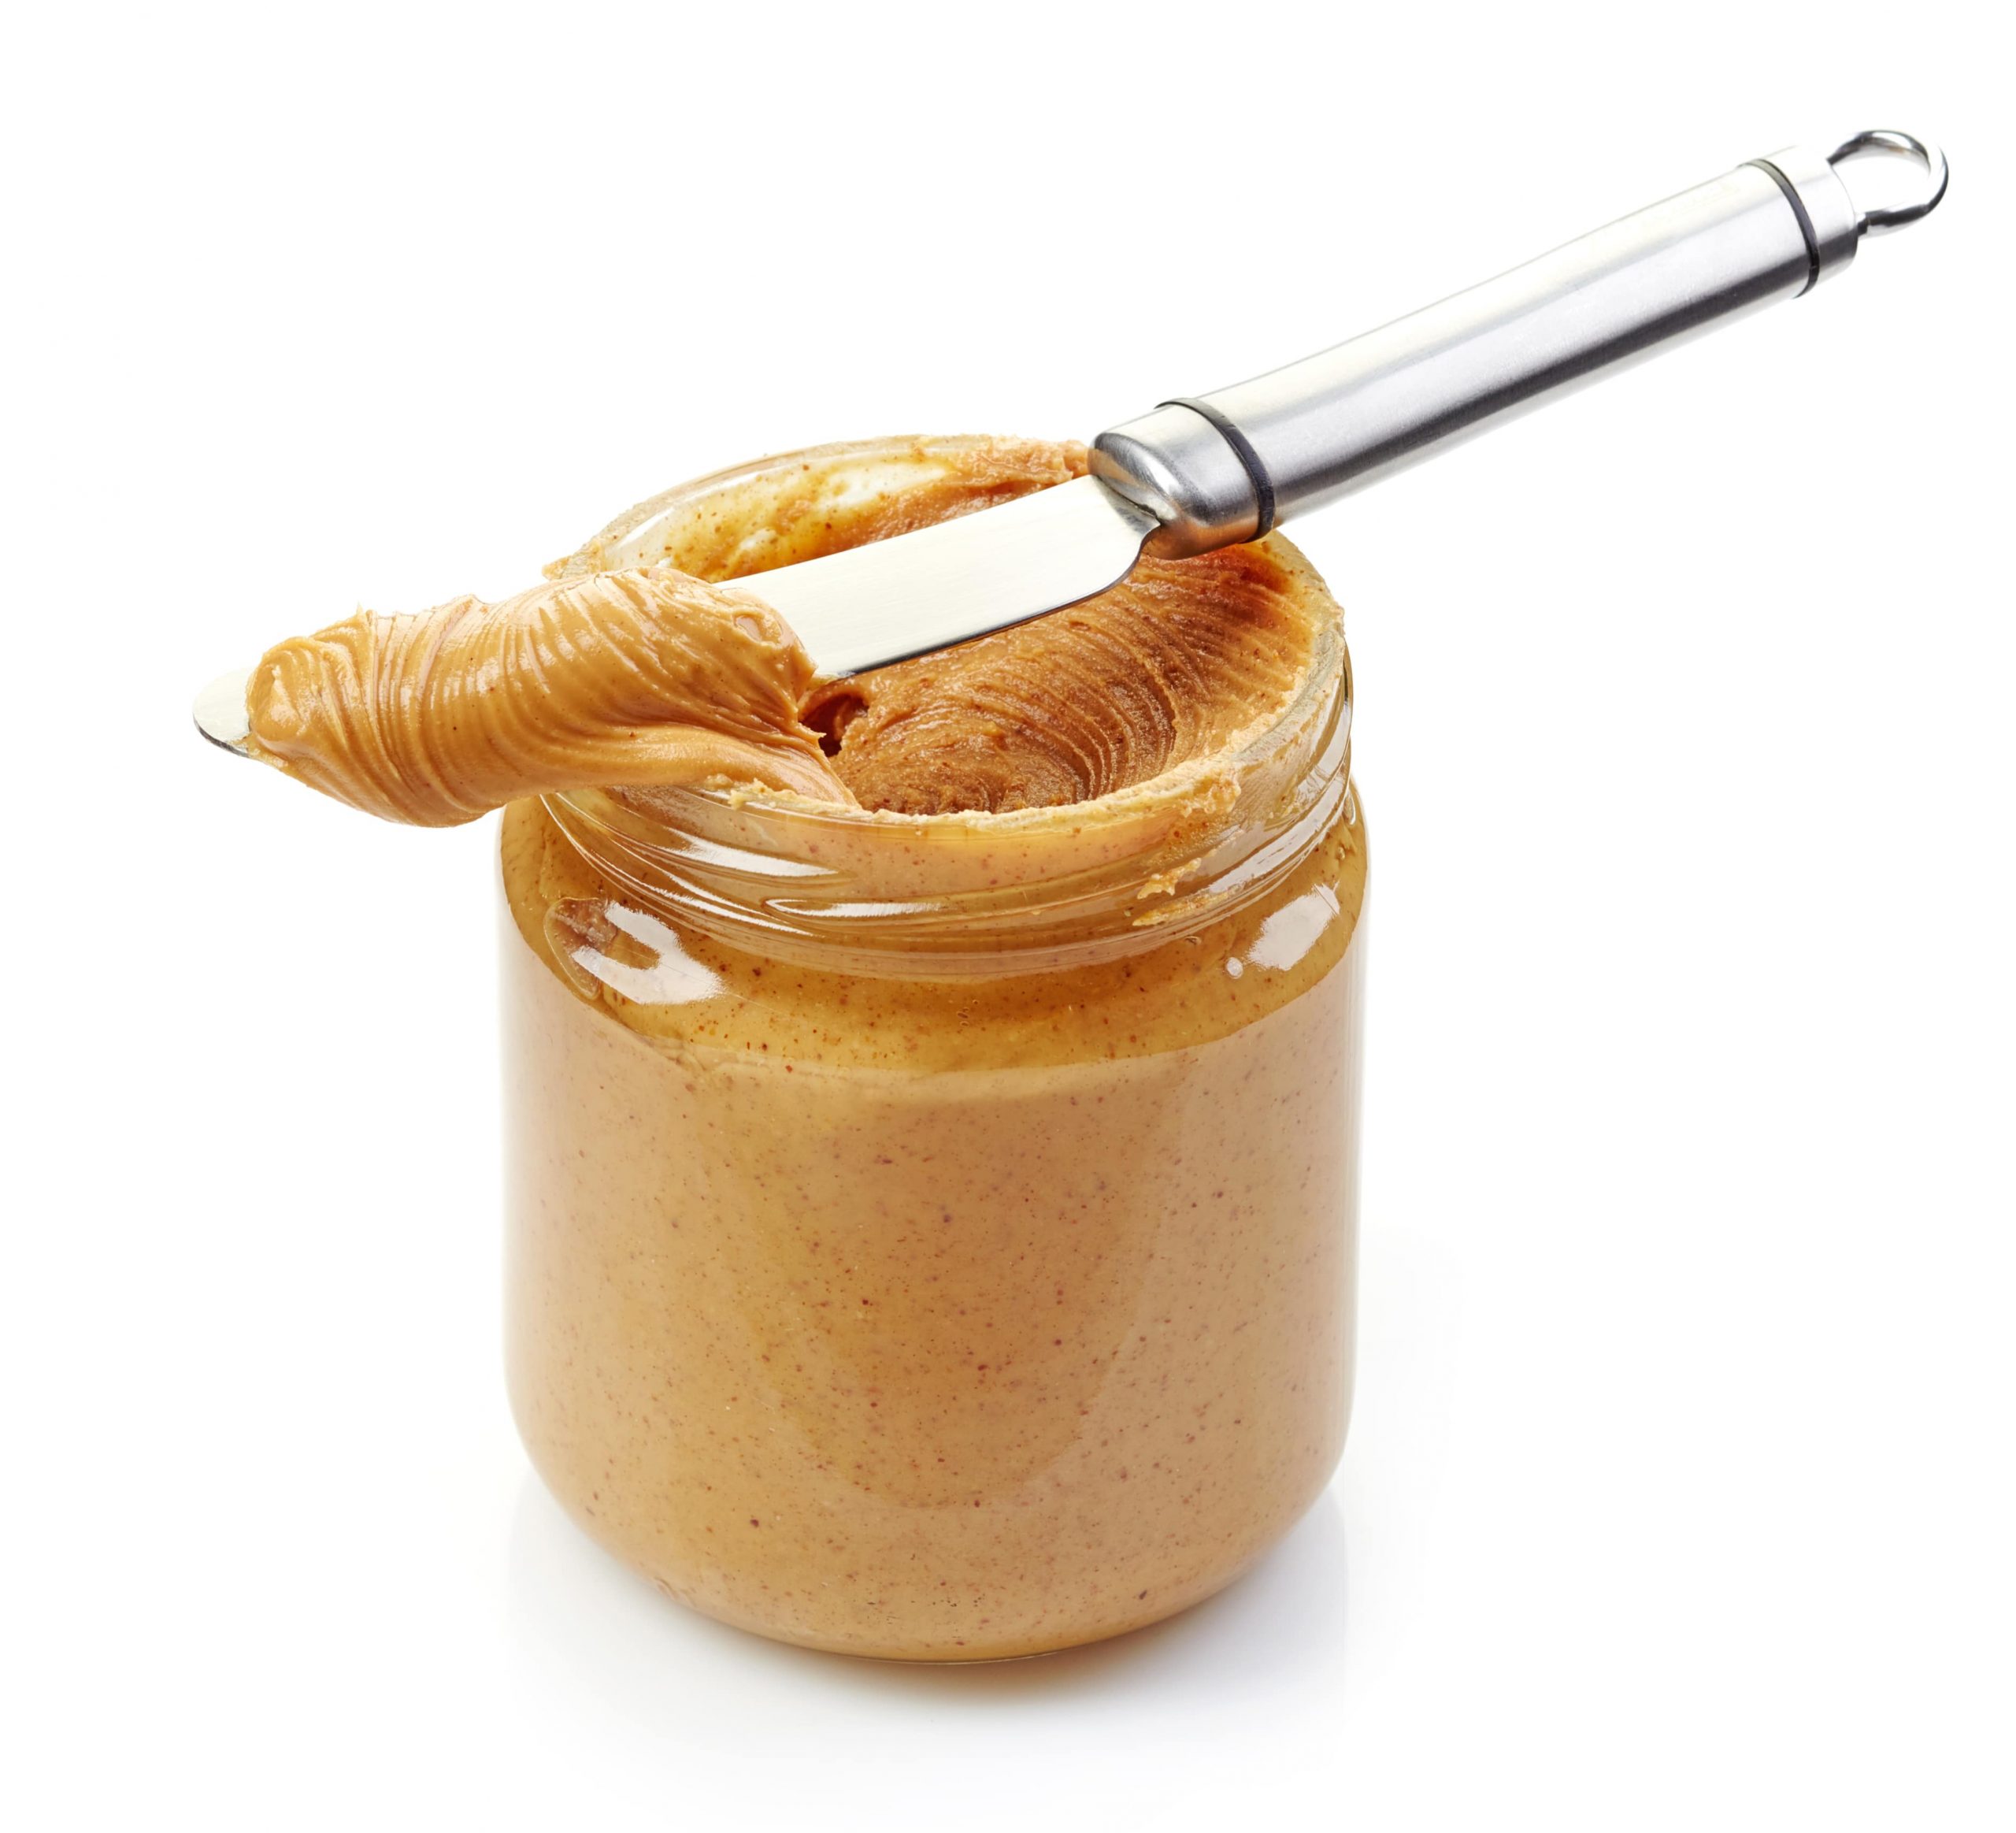 IS PB2 PEANUT BUTTER GOOD OR BAD FOR YOU SHOULD YOU TRY IT-min